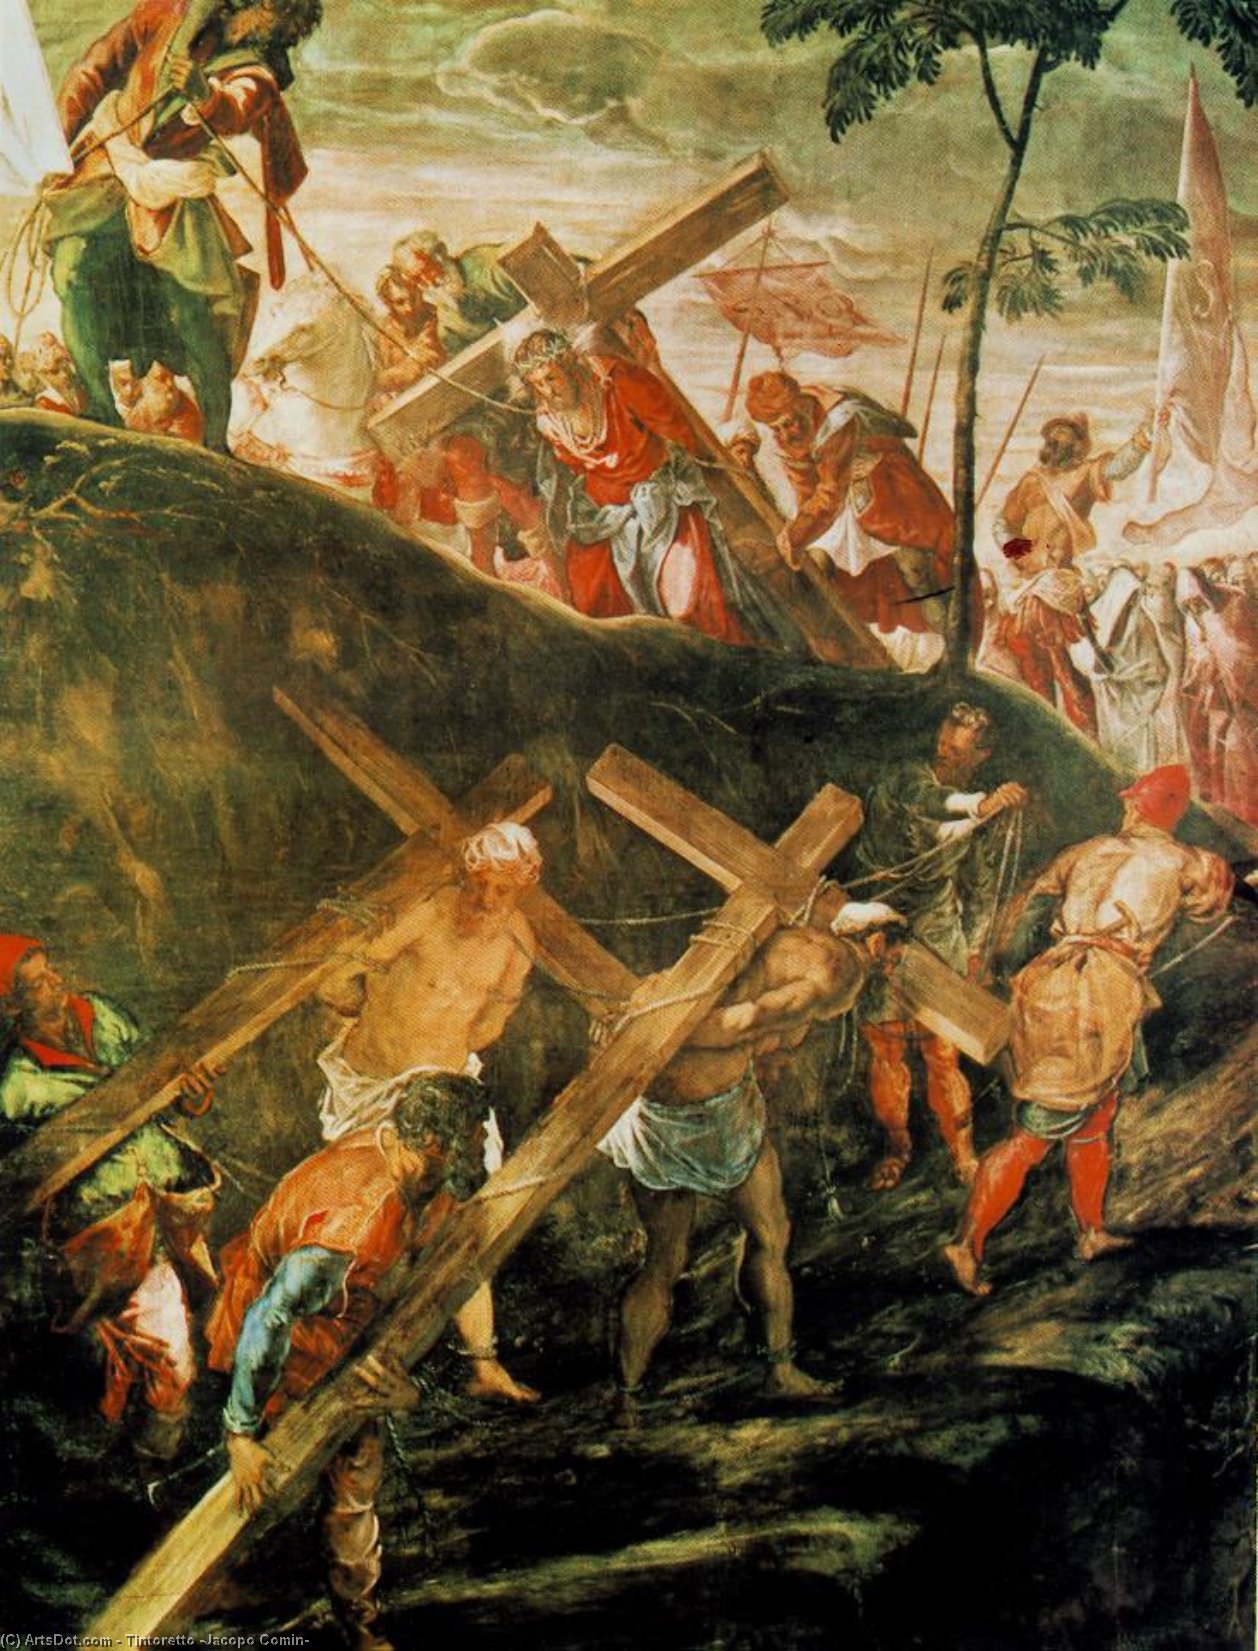 WikiOO.org - 백과 사전 - 회화, 삽화 Tintoretto (Jacopo Comin) - The Ascentto Calvary